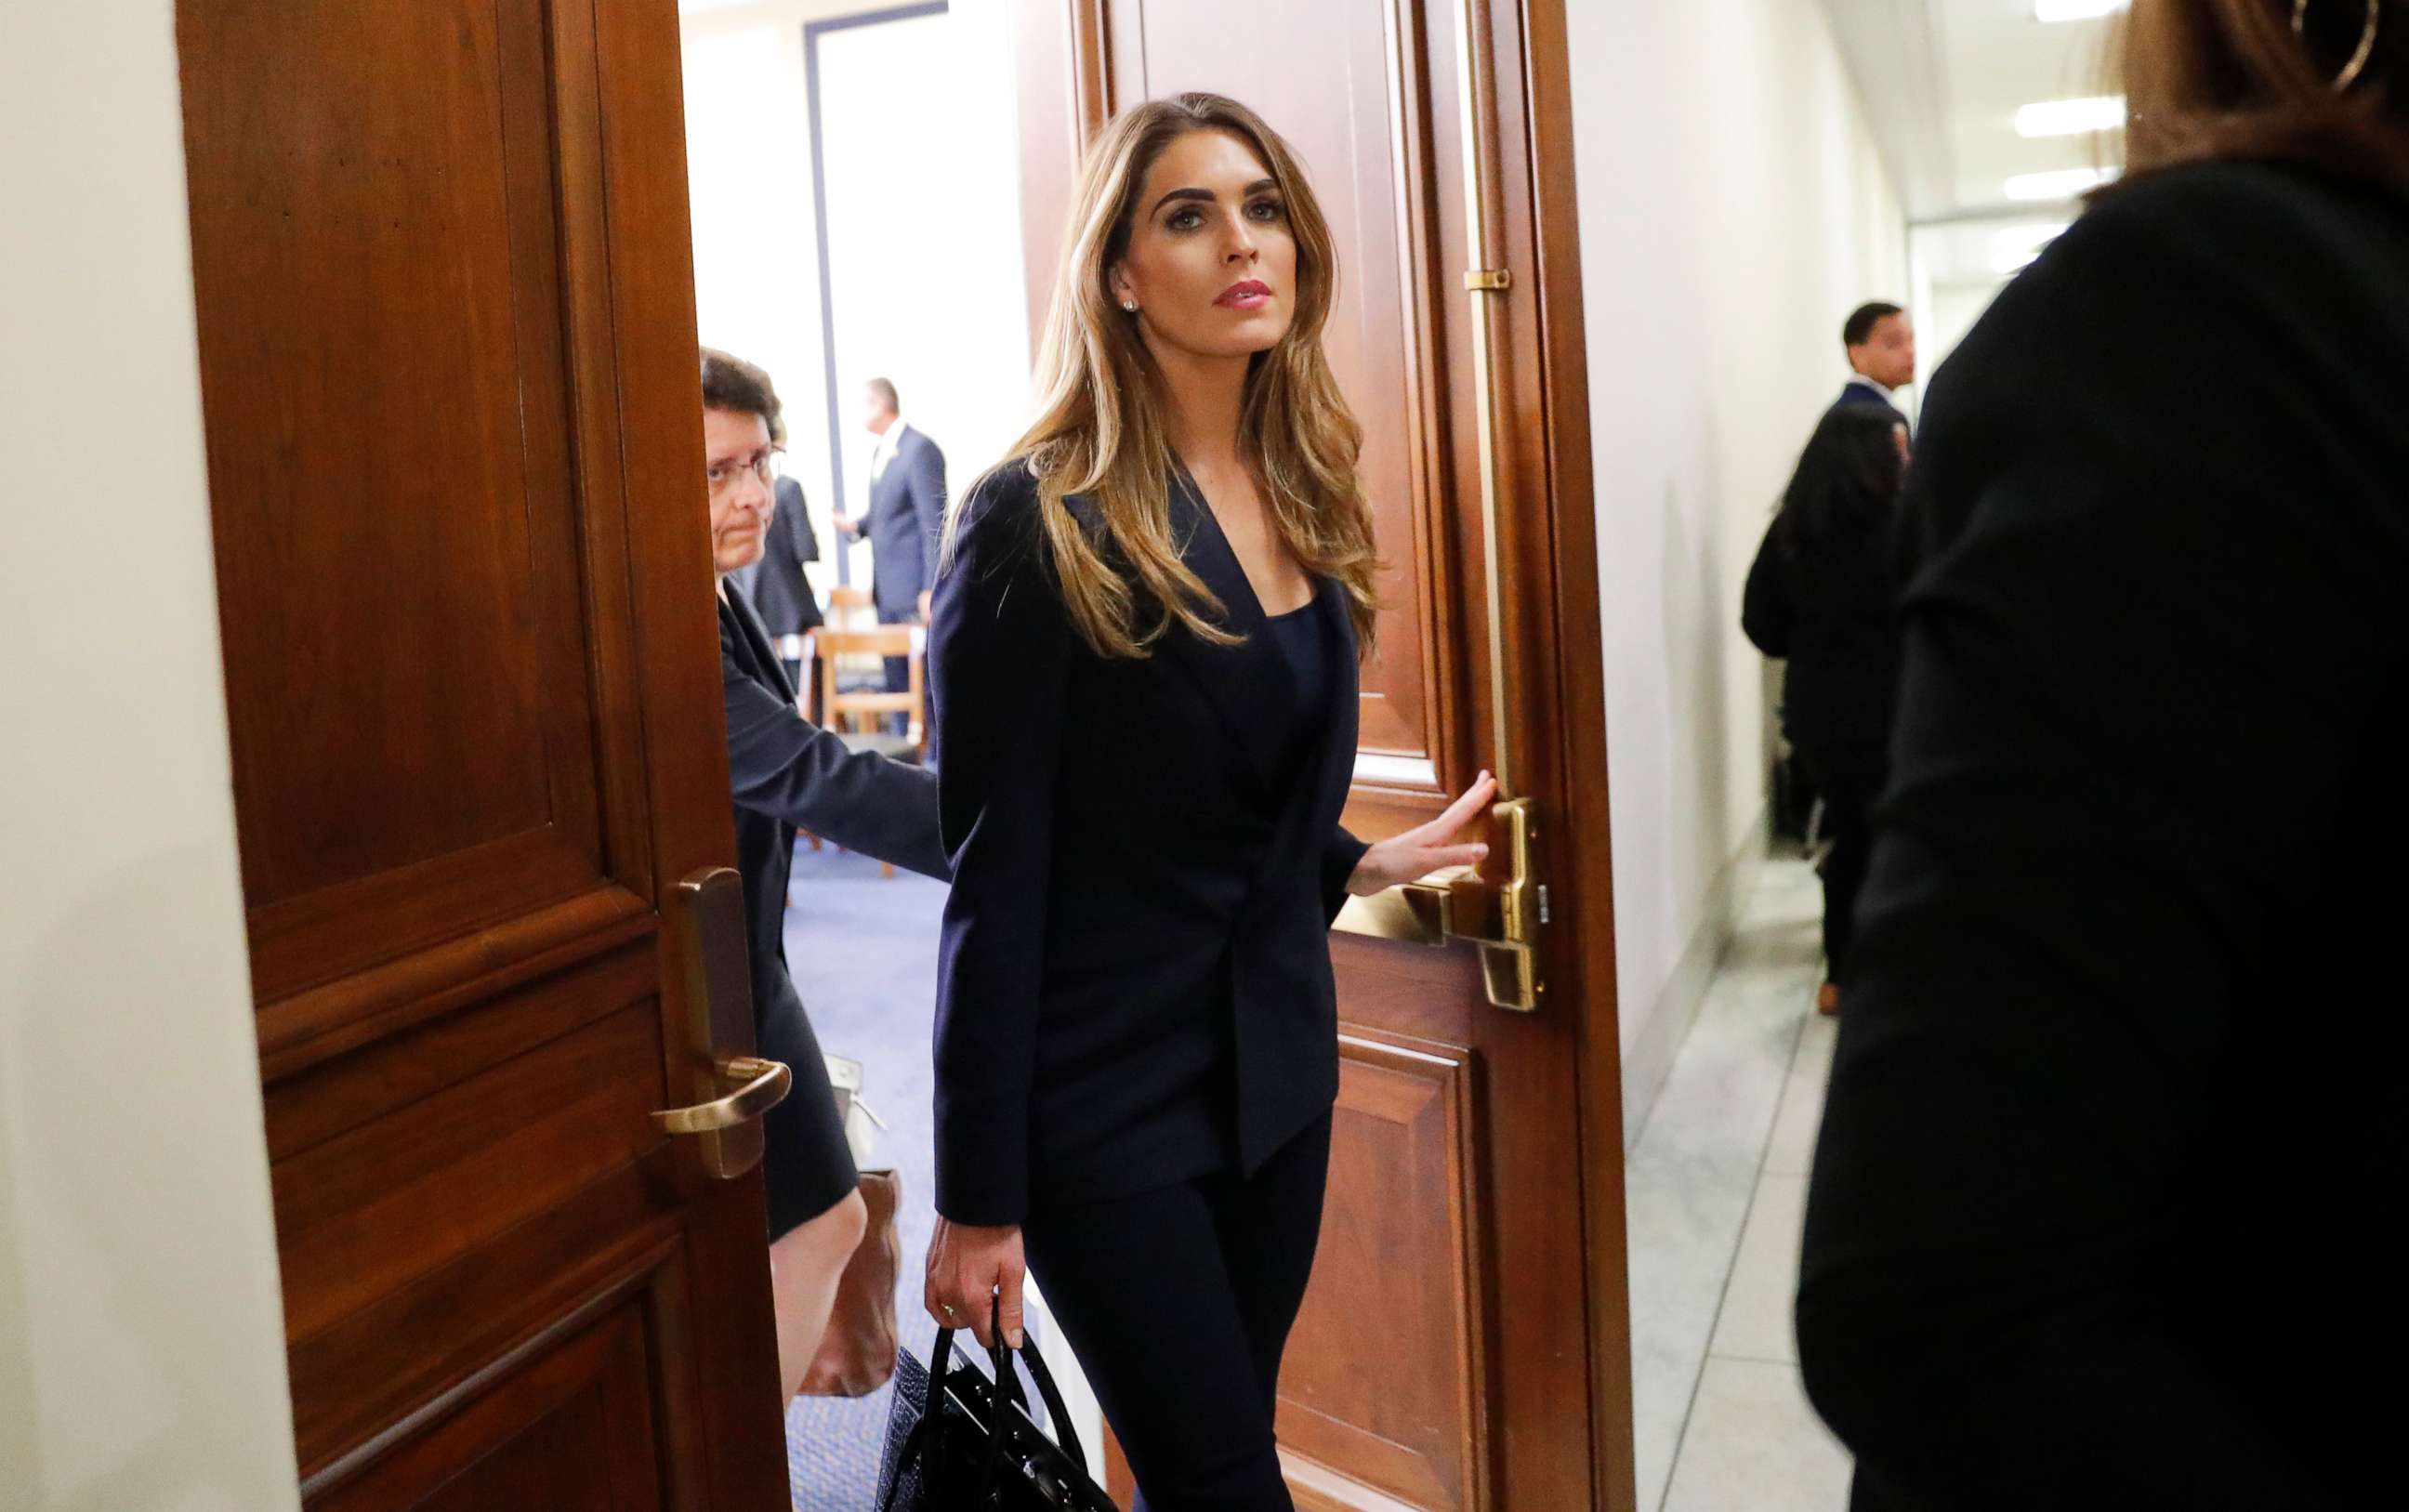 PHOTO: In this June 19, 2019, file photo, former White House communications director Hope Hicks is seen leaving a closed-door interview with the House Judiciary Committee of a lunch break, at the U.S. Capitol, in Washington, D.C.